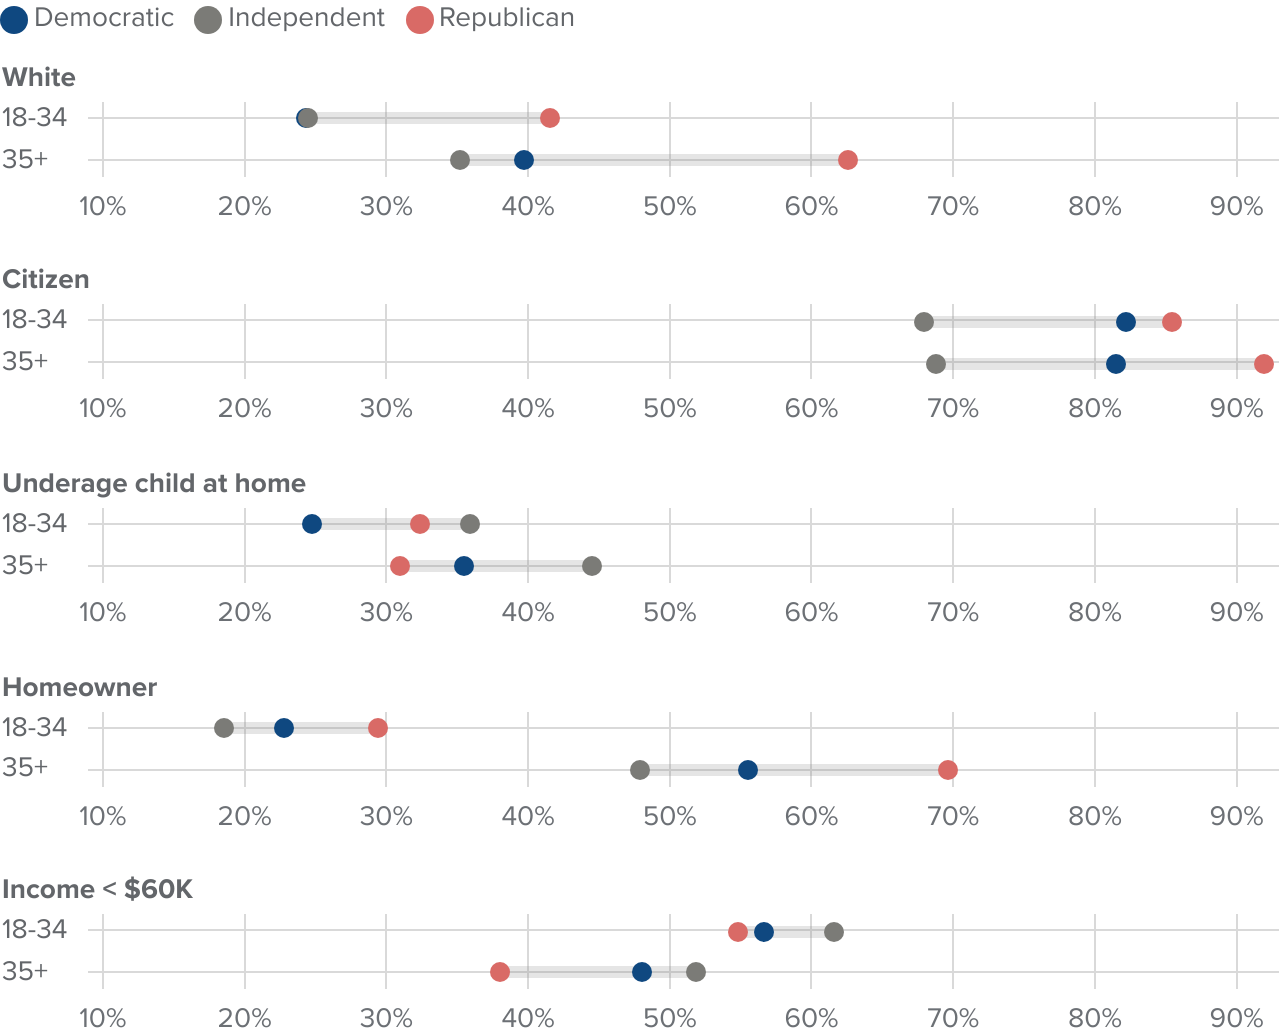 figure 2 - Older Republicans have a different demographic profile than other age-party groups